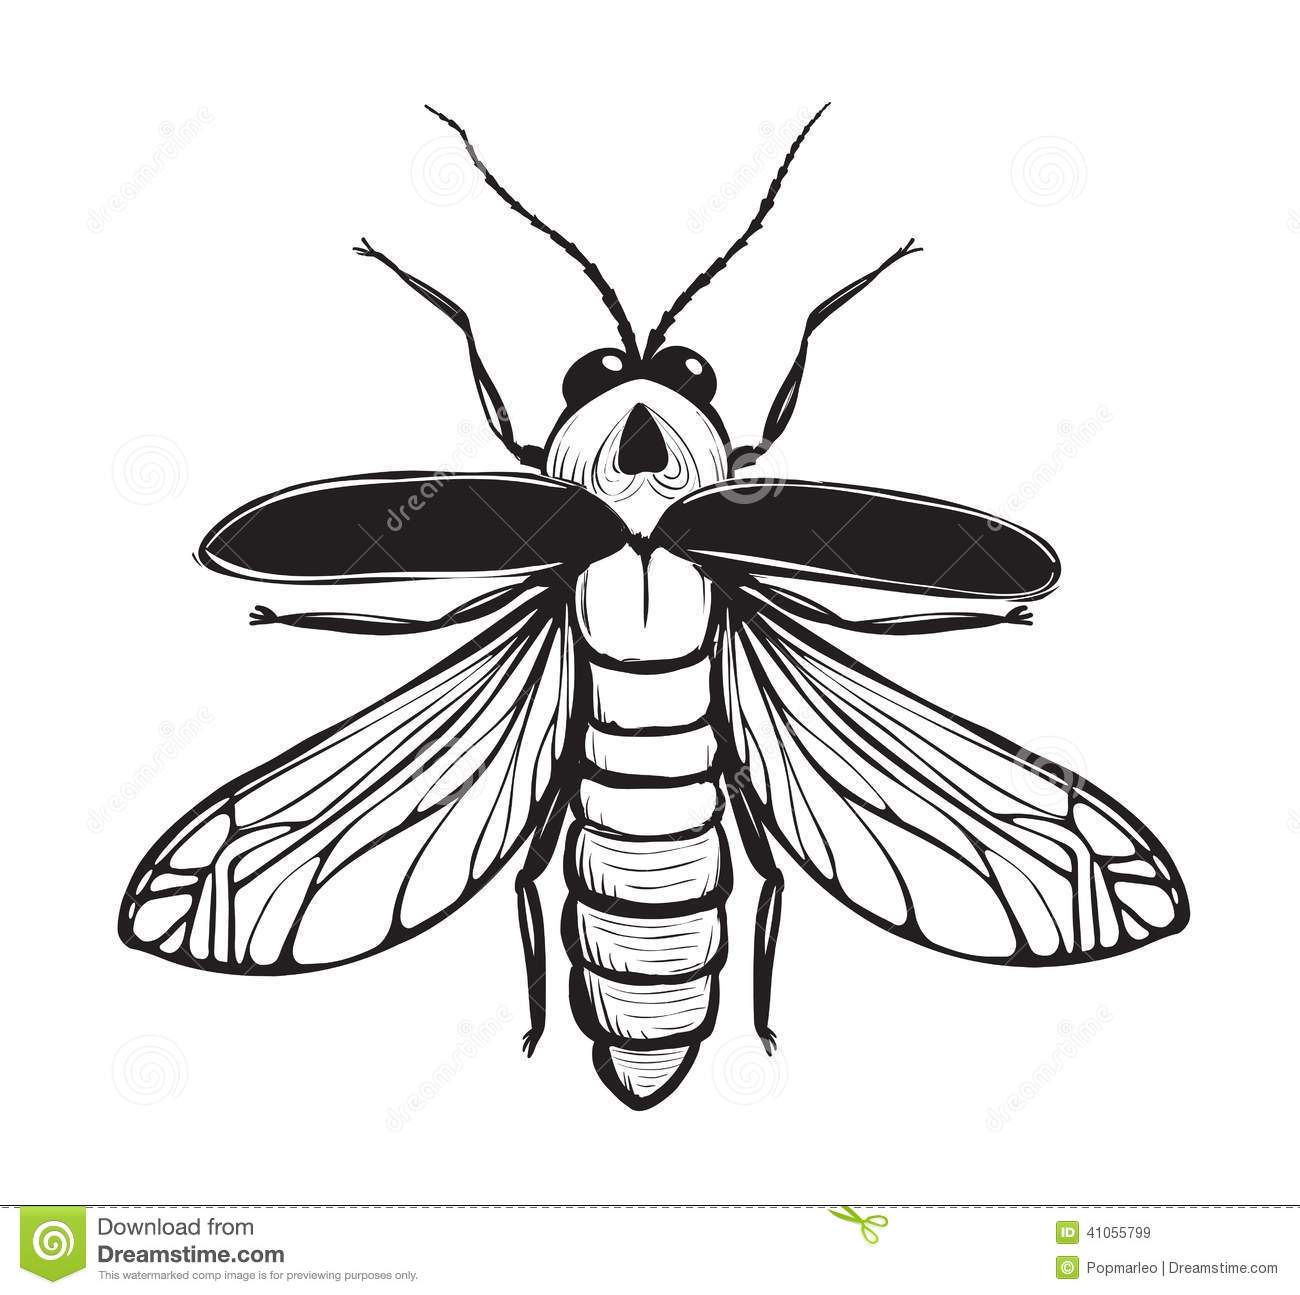 Firefly Insect Black Inky Drawing Stock Vector   Image  41055799